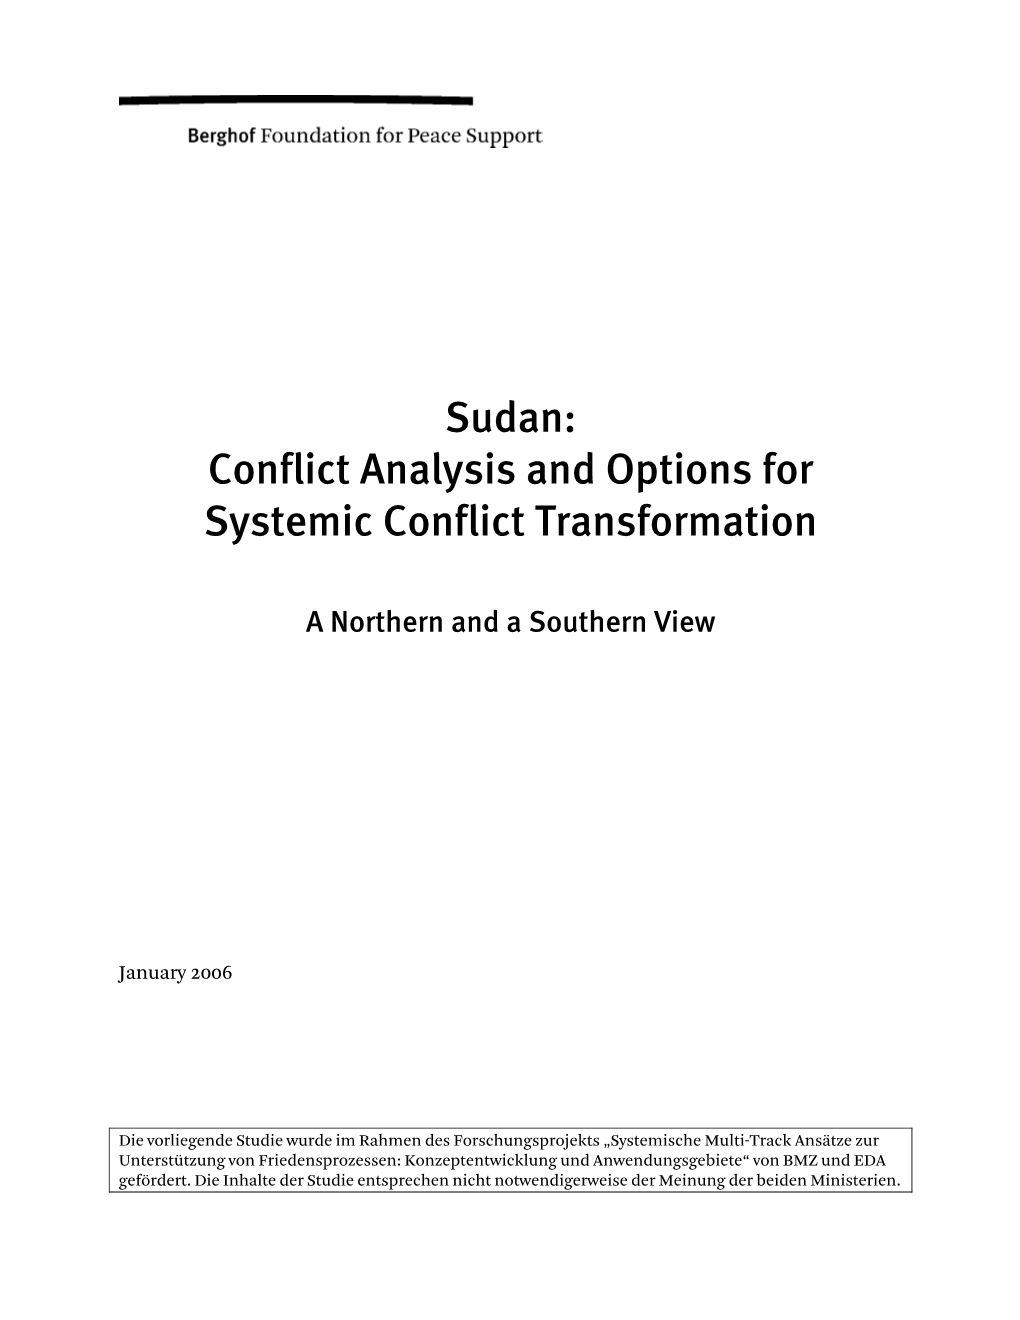 Sudan: Conflict Analysis and Options for Systemic Conflict Transformation